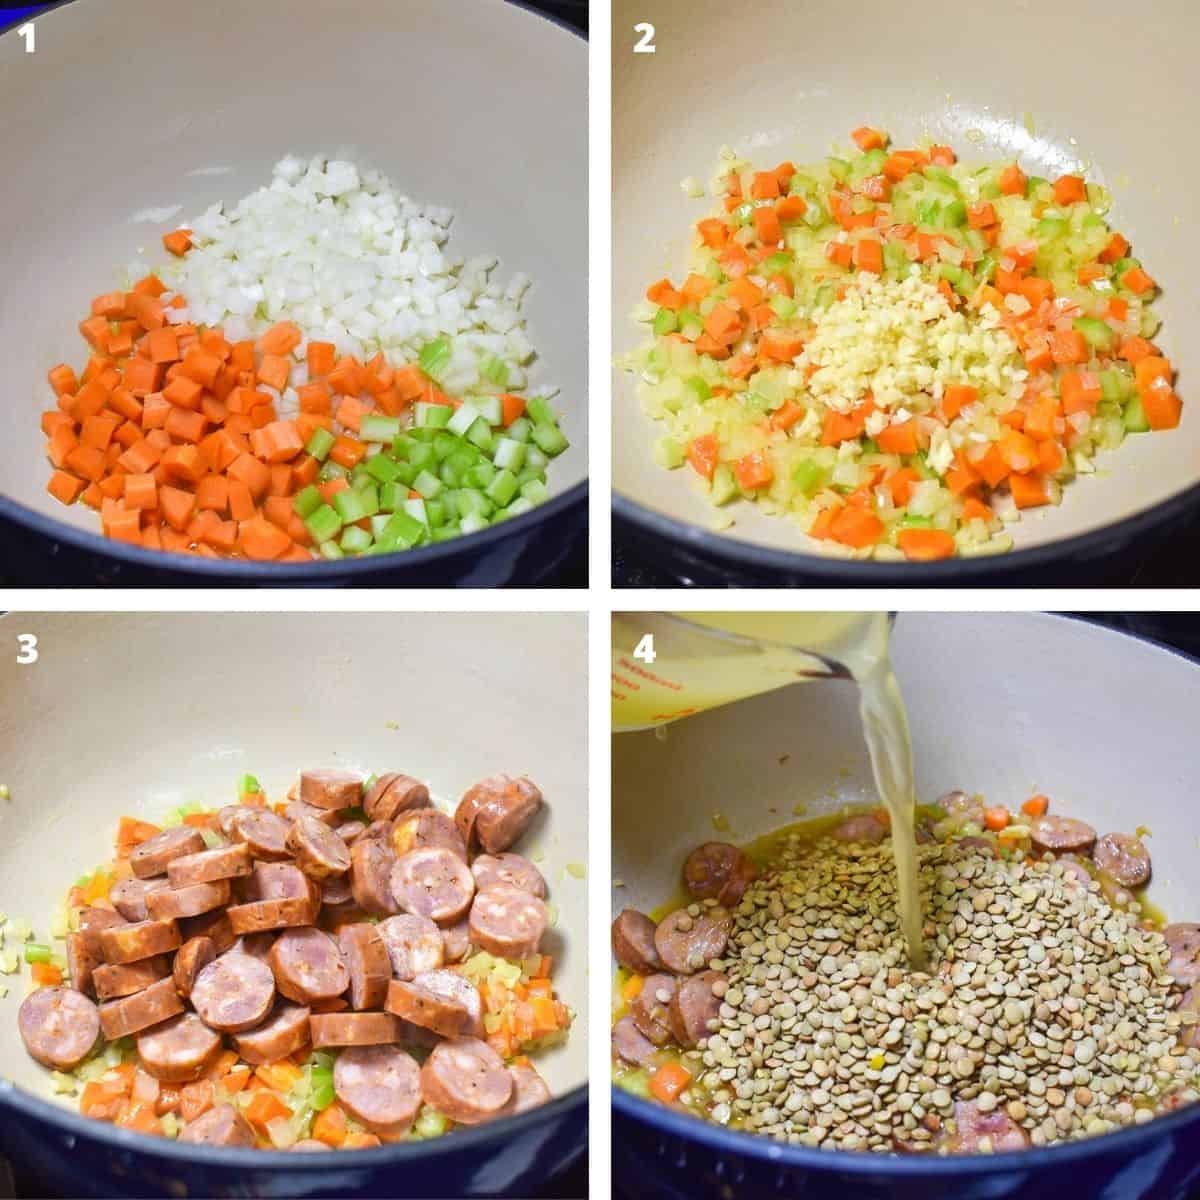 A collage of four images showing the steps of making the lentil soup.